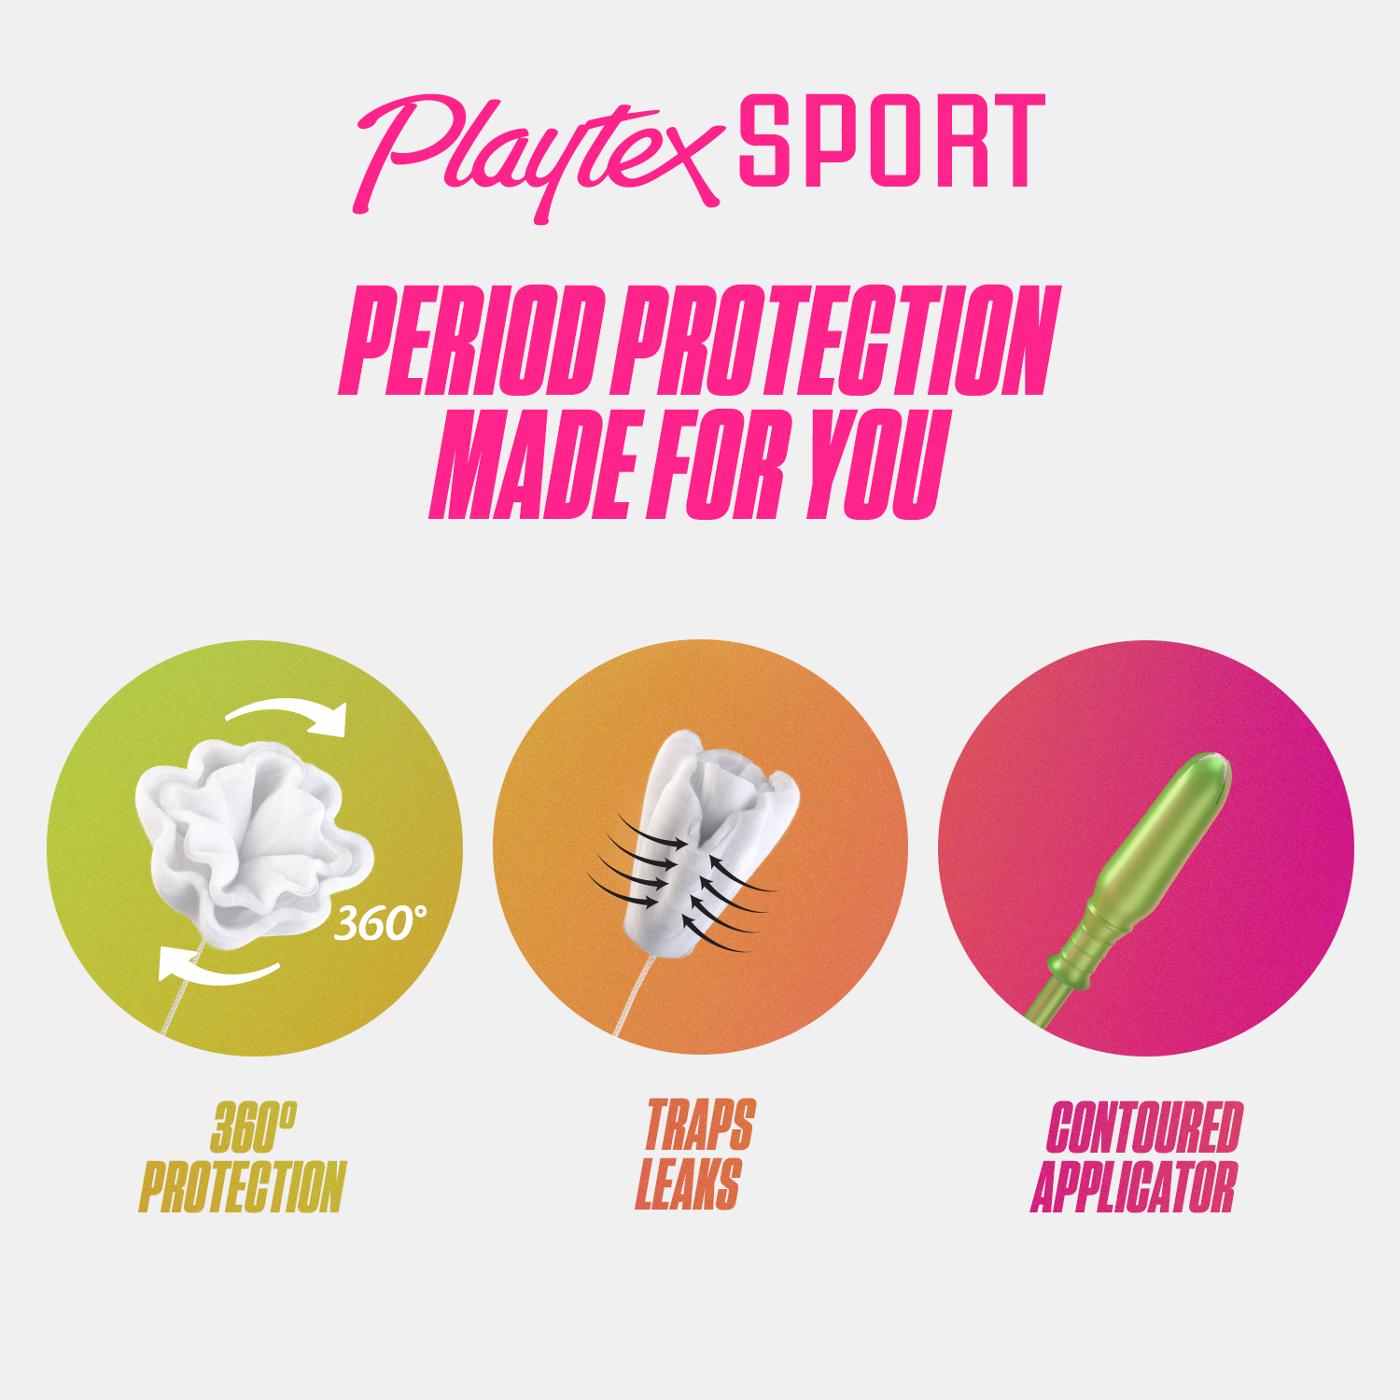 Playtex Sport Plastic Tampons - Super Absorbency - Shop Tampons at H-E-B